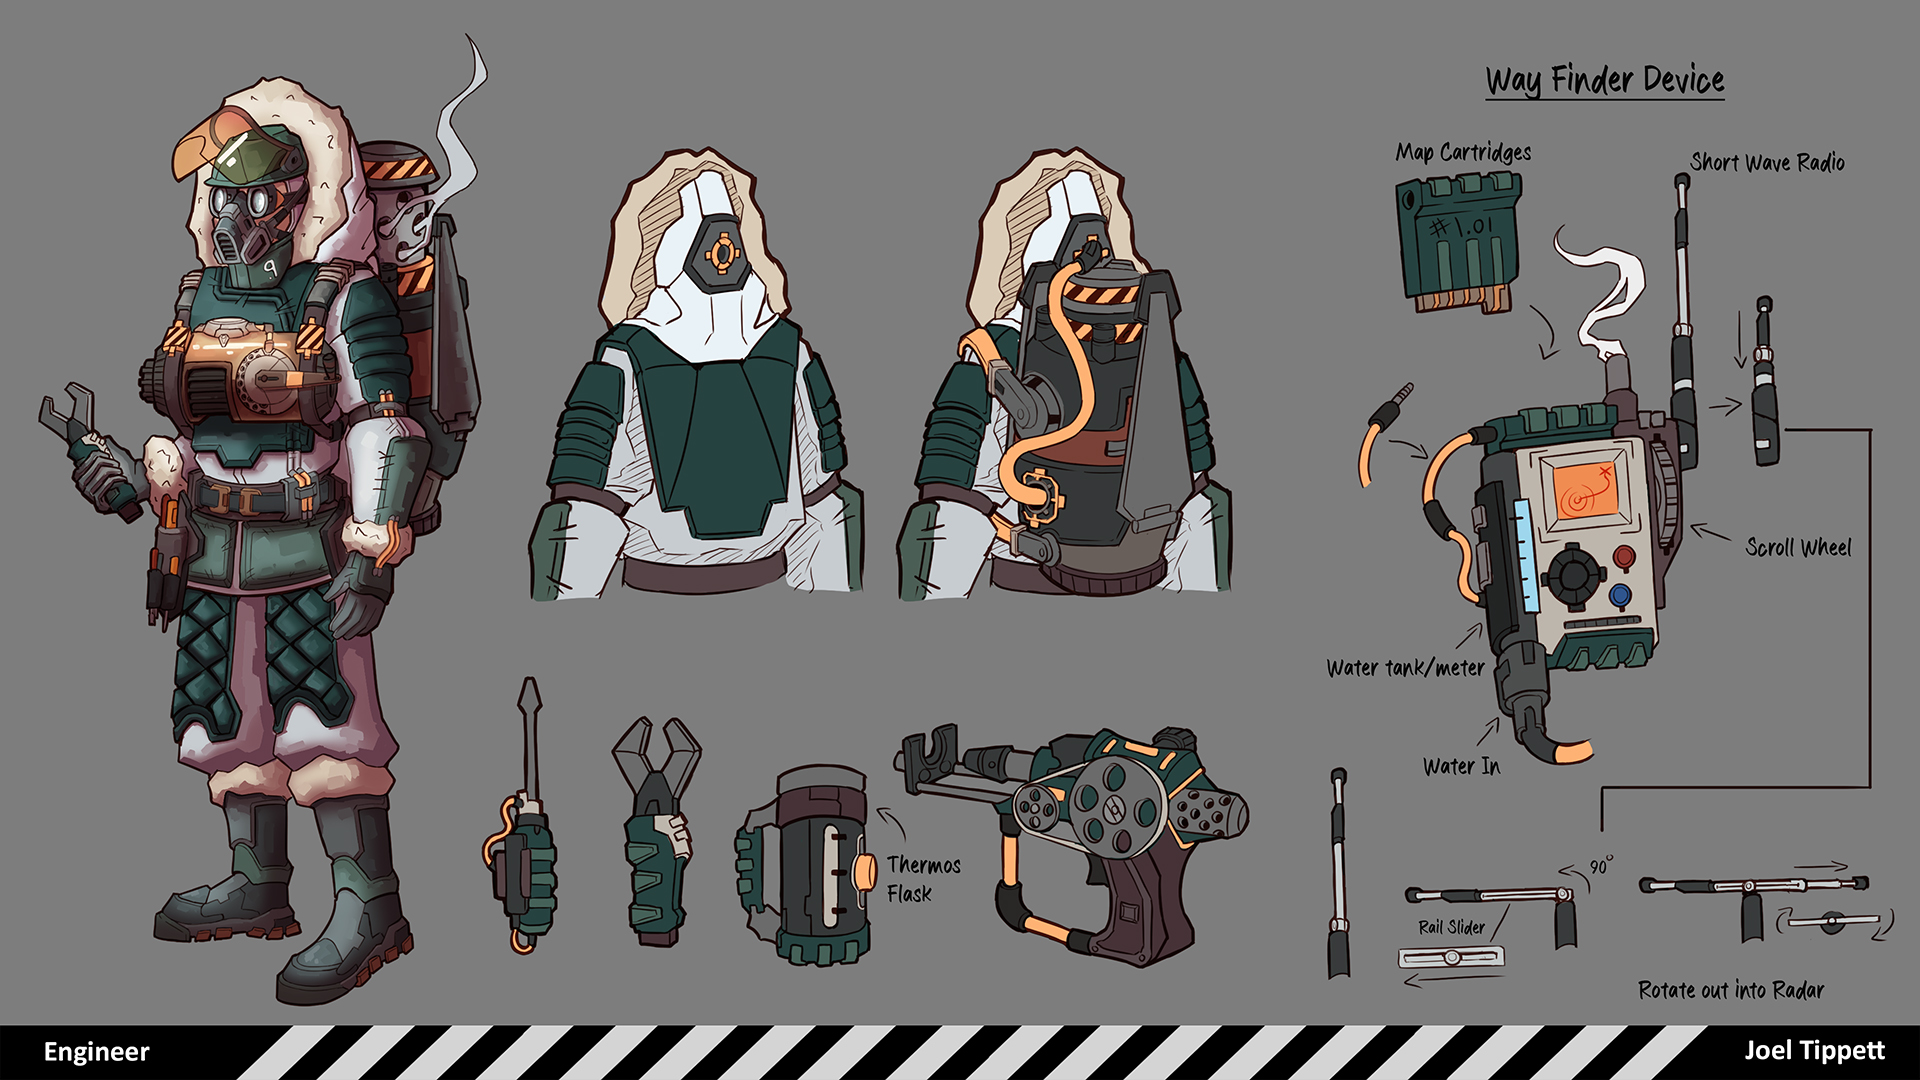 A character concept sheet depicting an engineer design equipped with a thermal suit for cold environments and a set of tools use in their day to day work.